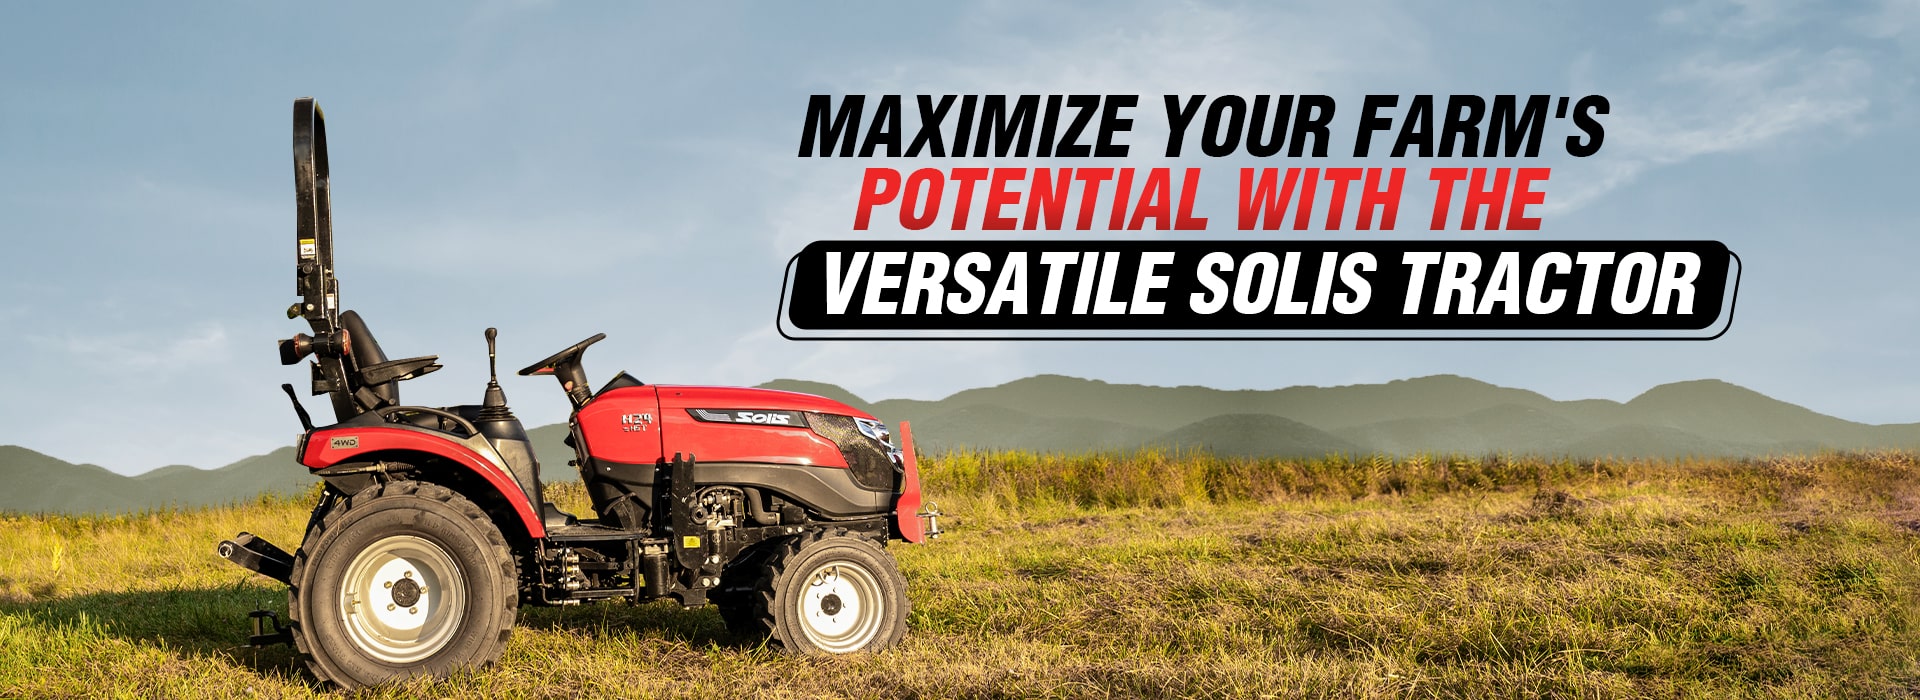 Maximize Your Farm’s Potential with Solis Tractor